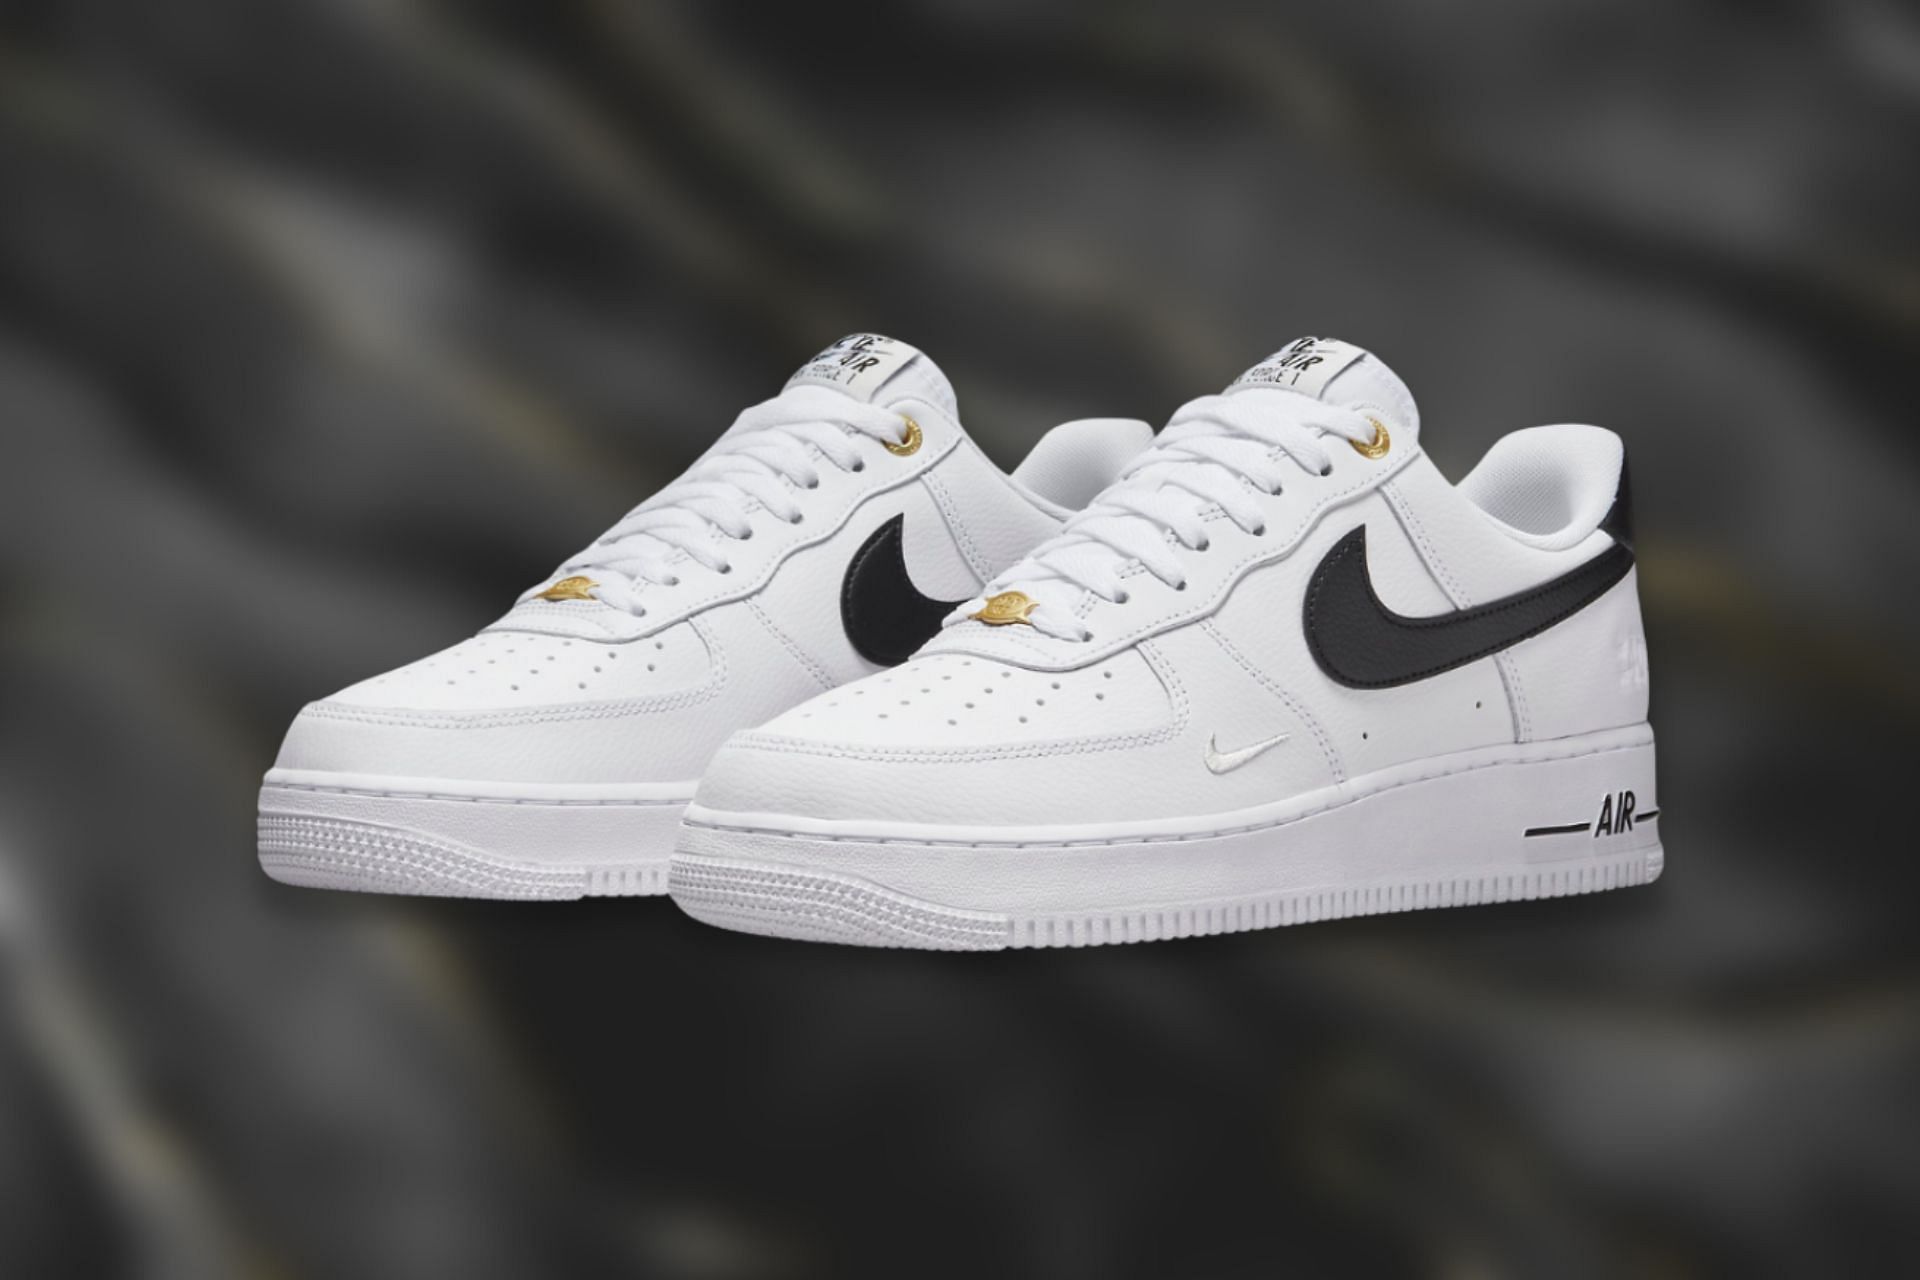 zonnebloem impliciet Badkamer Where to buy Nike Air Force 1 Low “White Black” shoes? Price, release date,  and more details explored